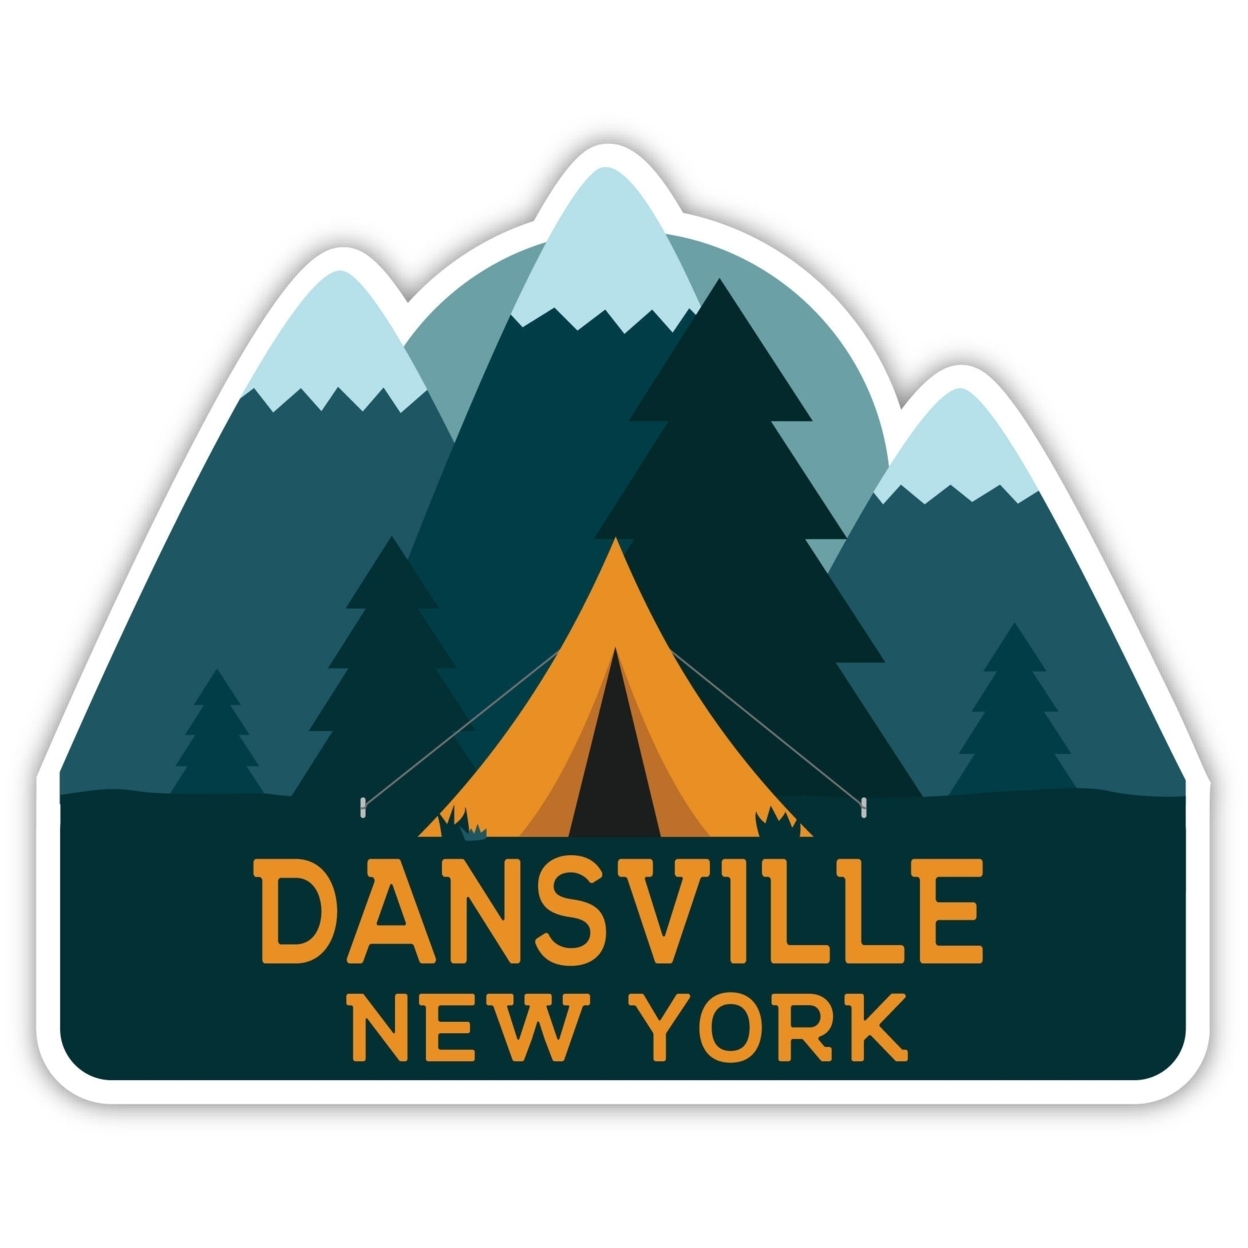 Dansville New York Souvenir Decorative Stickers (Choose Theme And Size) - 4-Pack, 6-Inch, Tent